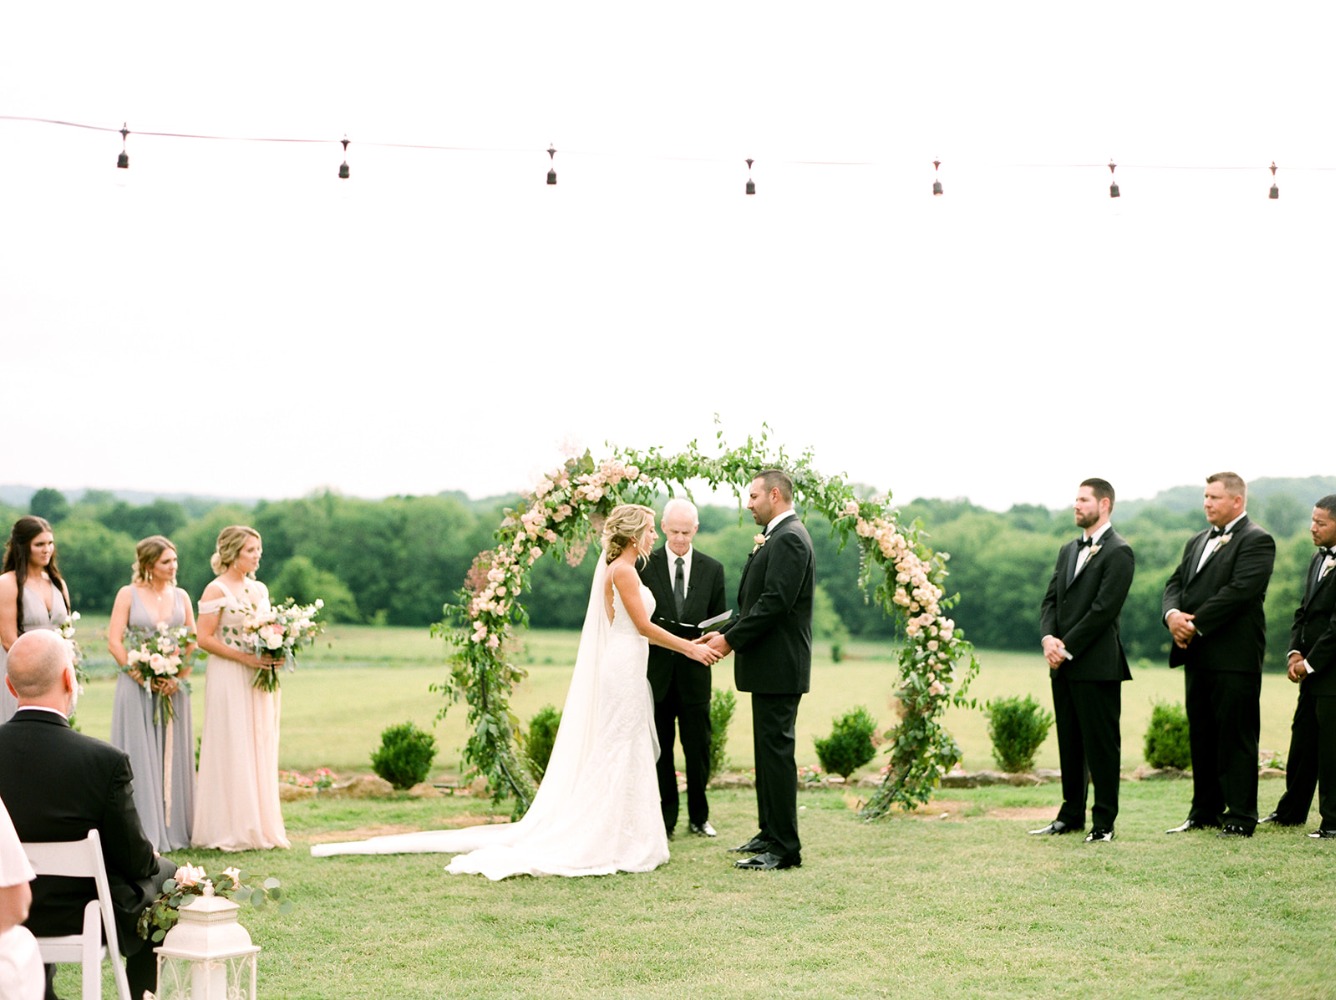 outdoor wedding ceremony with round floral arch backdrop